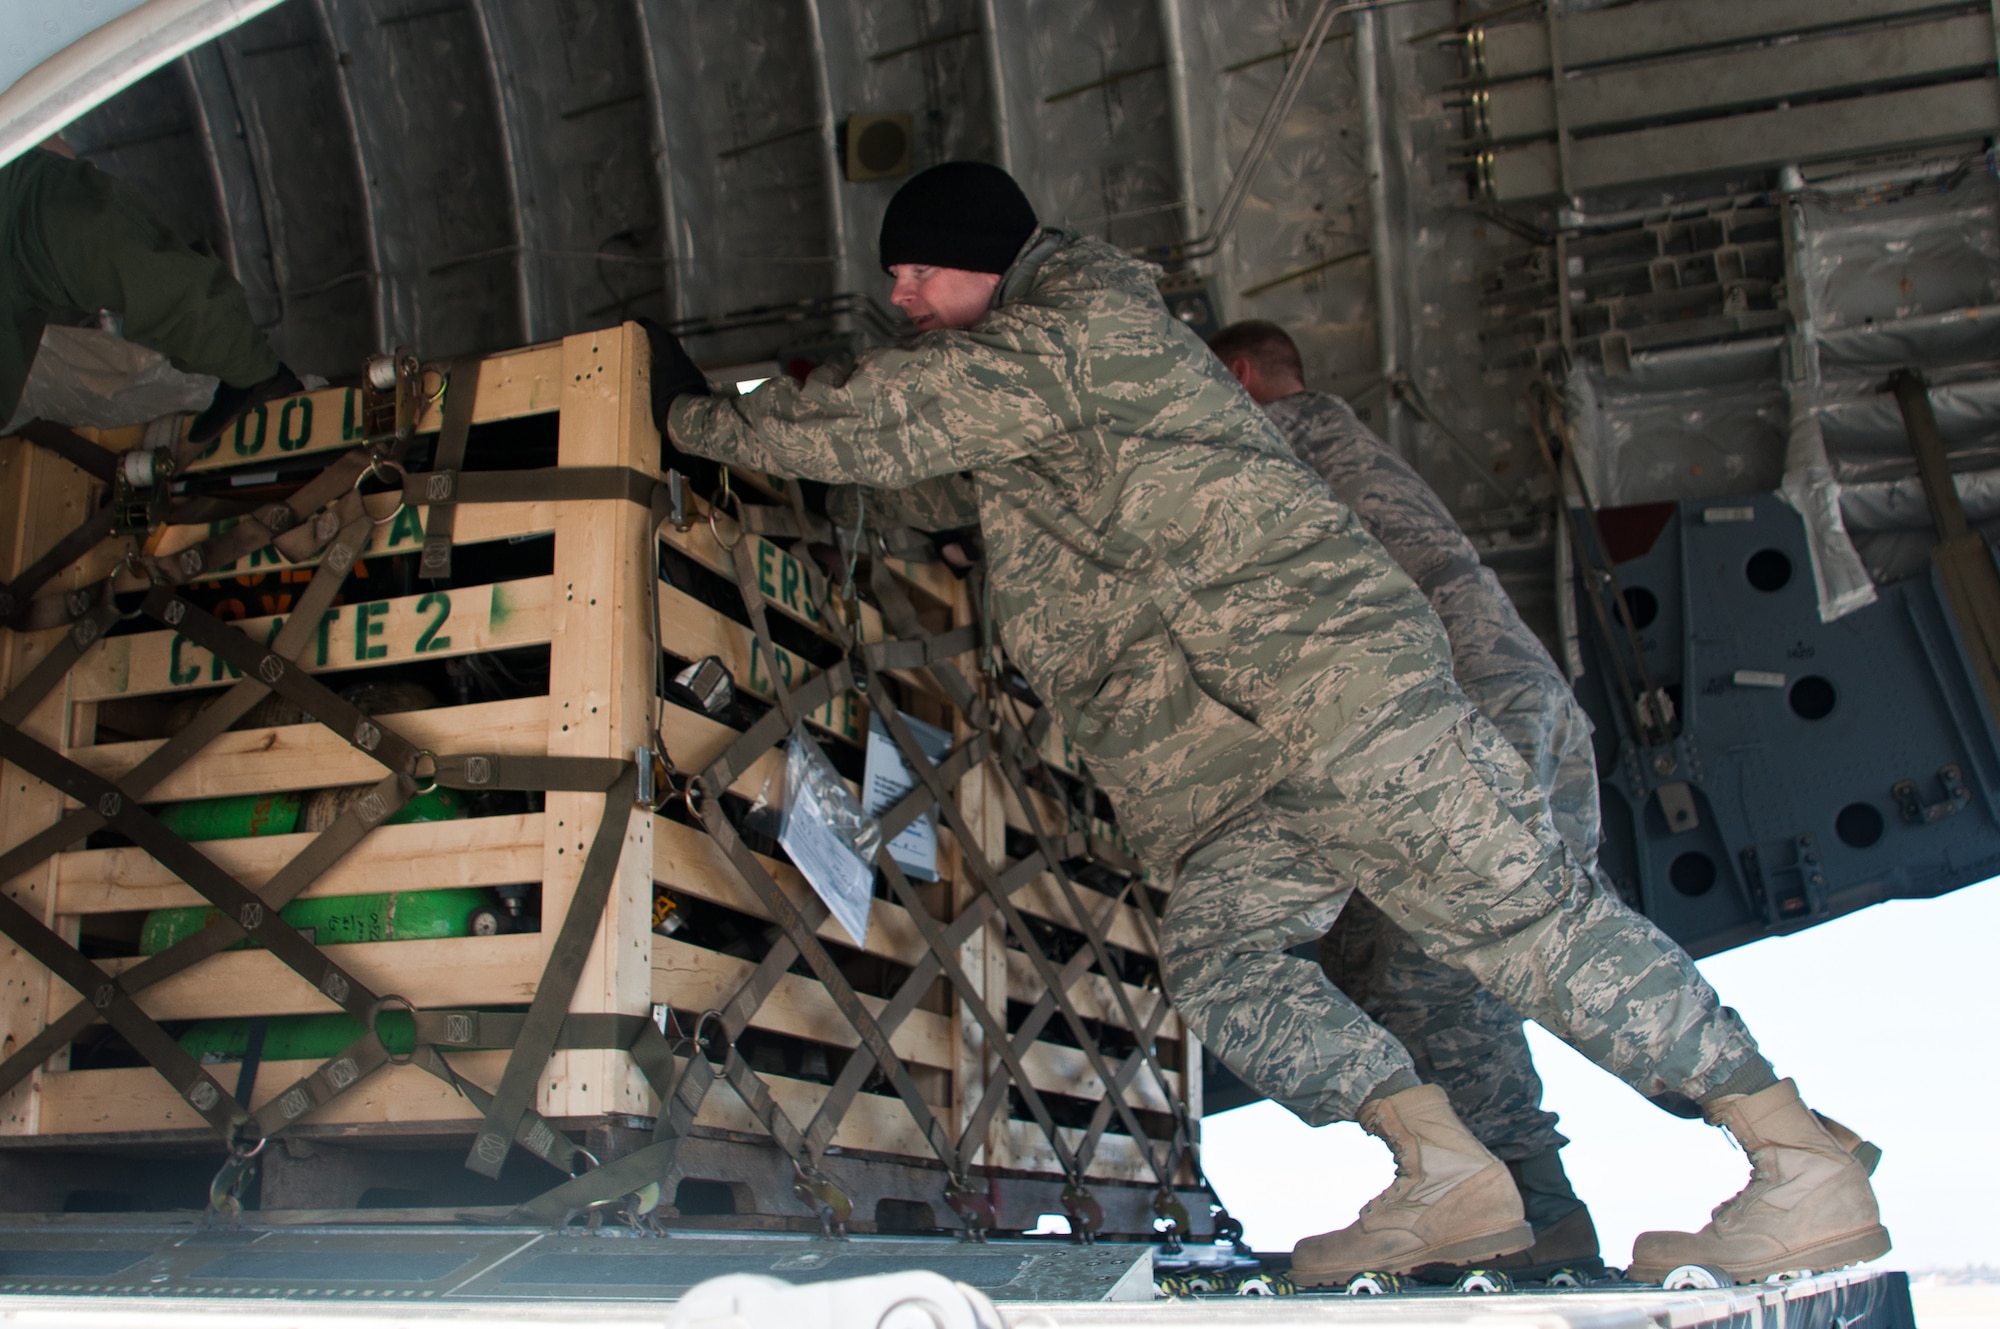 Airmen from the Air Force Reserve's 315th Airlift Wing, Charleston, S.C., load medical supplies onto a 315th AW C-17 Dec. 30, 2010, at Robins Air Force Base, Ga. The aircrew landed here to pick up humanitarian aid bound for Managua, Nicaragua. A 1984 E-One fire truck and supplies, totaling nearly 3.5 tons, was donated by Emergency Response Services for Latin America to assist countries in Latin America. (U.S. Air Force photo/Staff Sgt. Alexy Saltekoff)